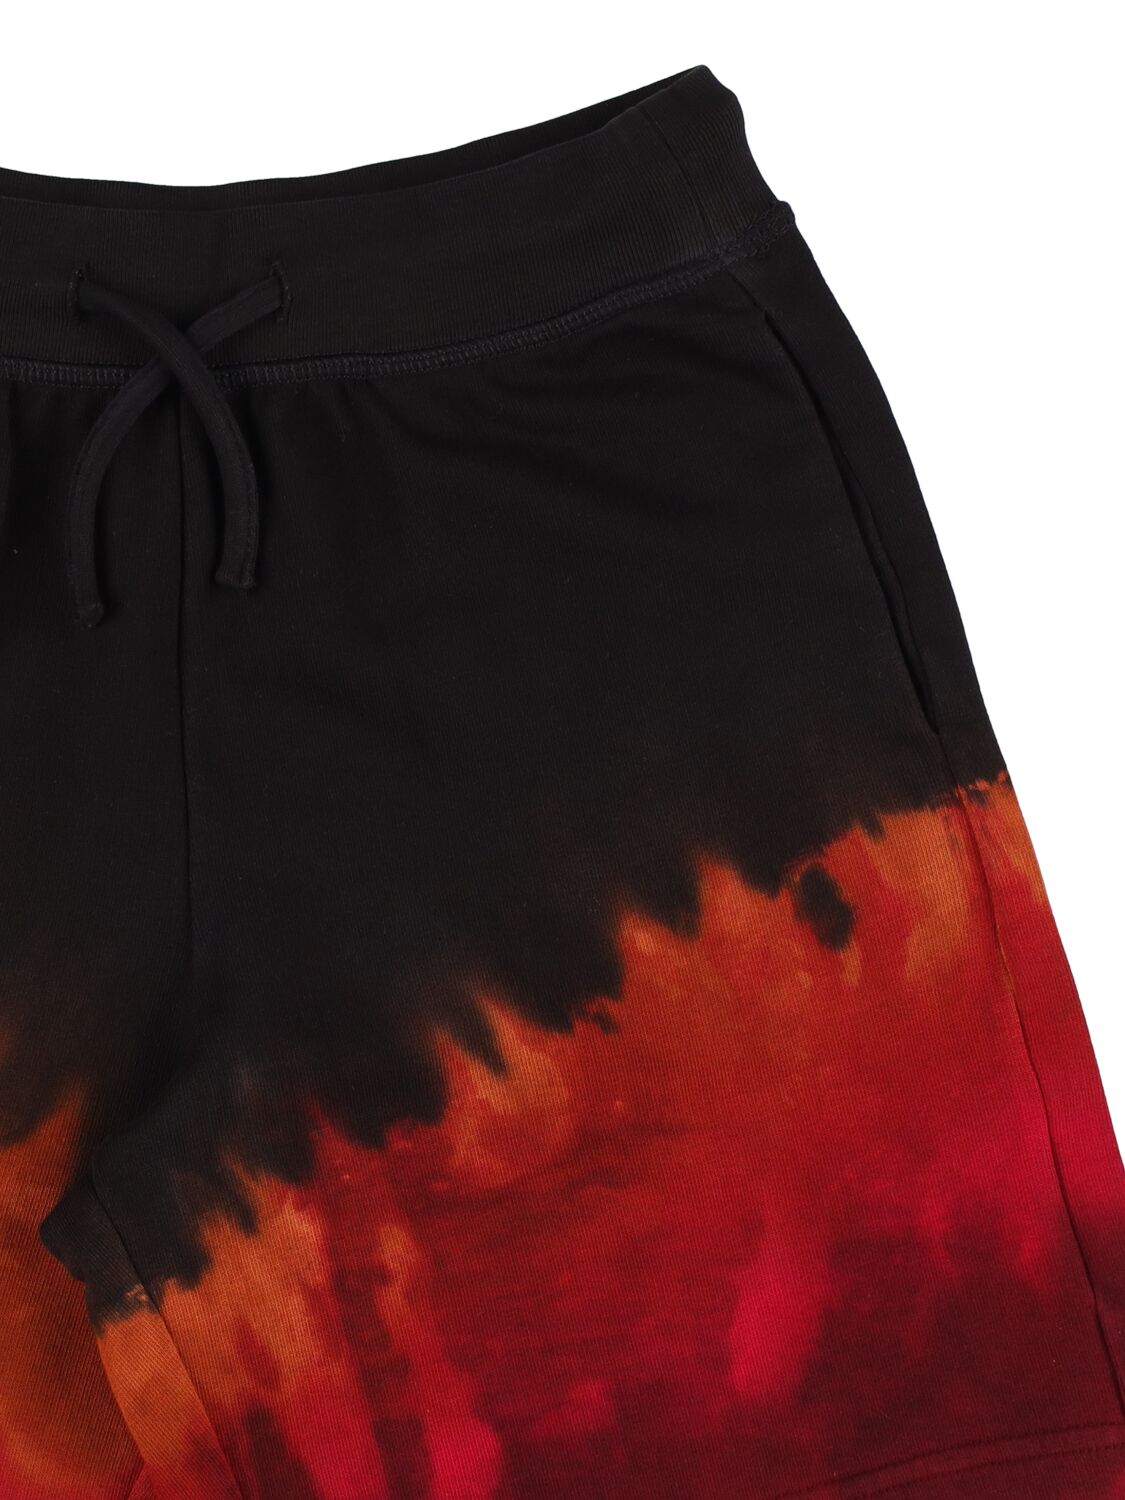 Shop Dsquared2 Printed Cotton Sweat Shorts In Black